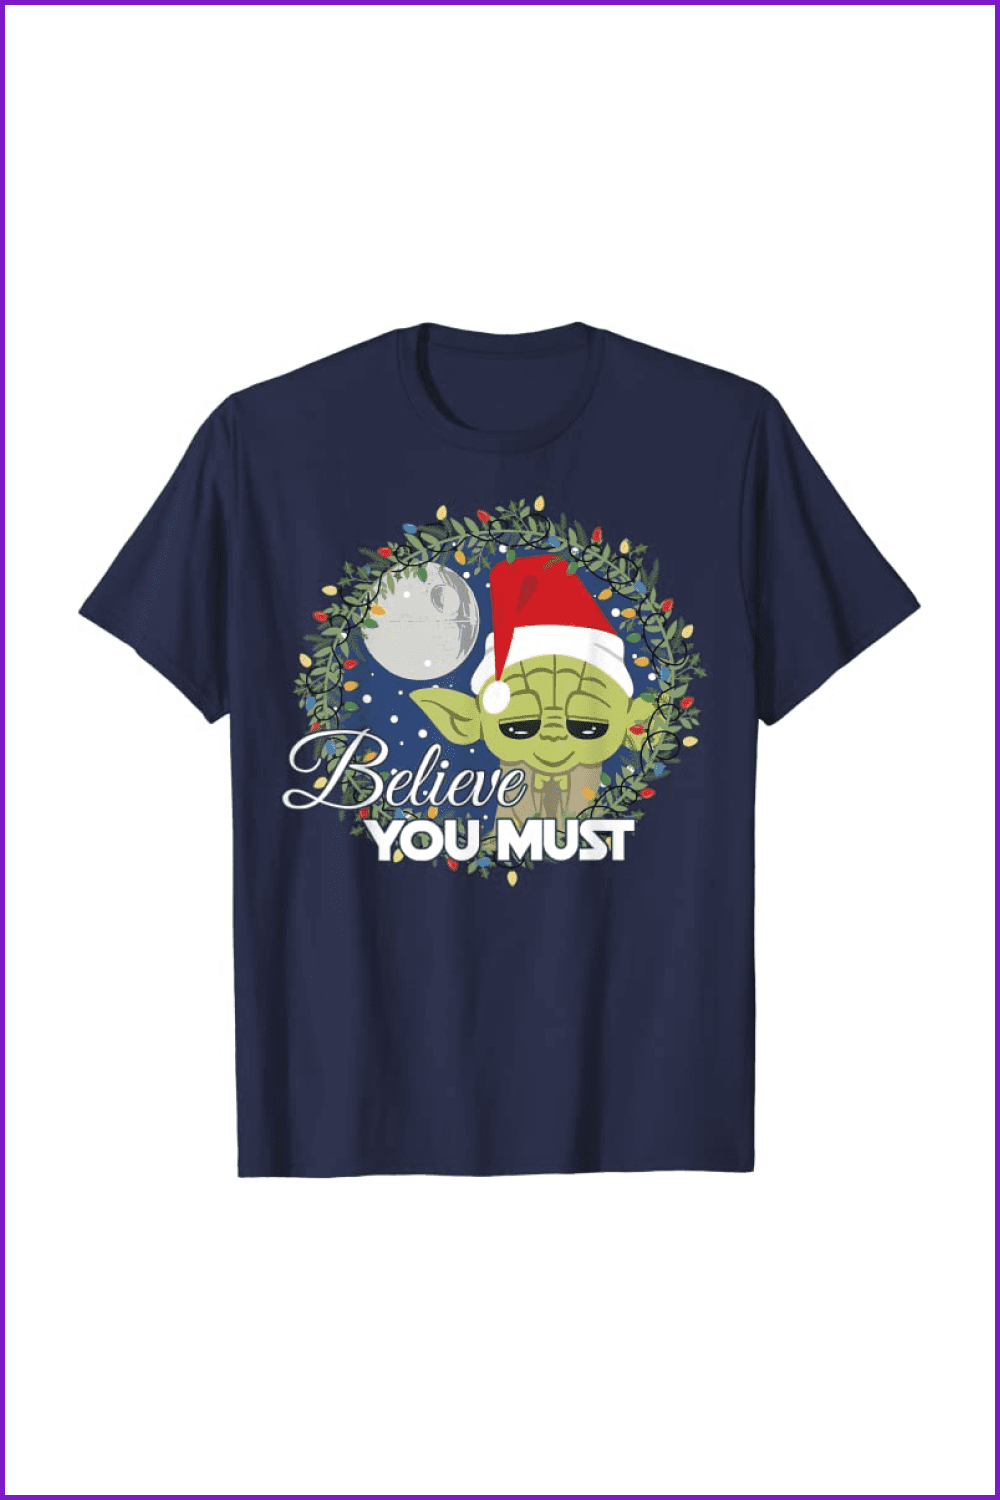 T-shirt with a Star Wars Yoda Santa and inscription Believe You Must.